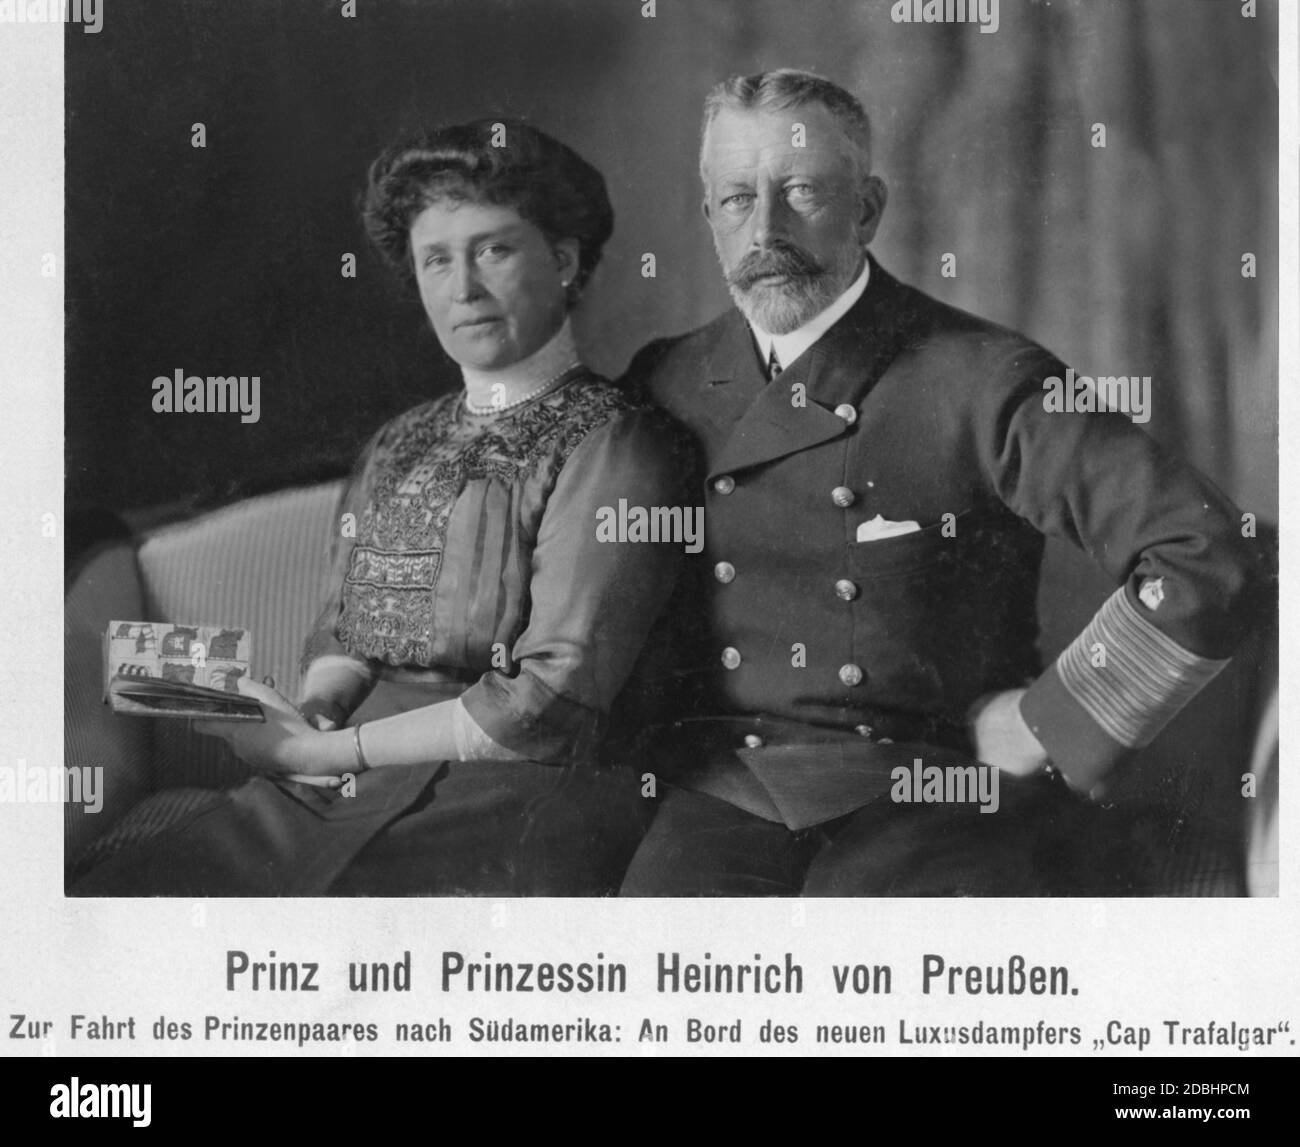 Princess Irene of Prussia (born of Hesse-Darmstadt) and Prince Henry of Prussia (in the uniform of a Grand Admiral) are on board the luxury liner SMS Cap Trafalgar. They made a voyage to South America in early 1914. Stock Photo